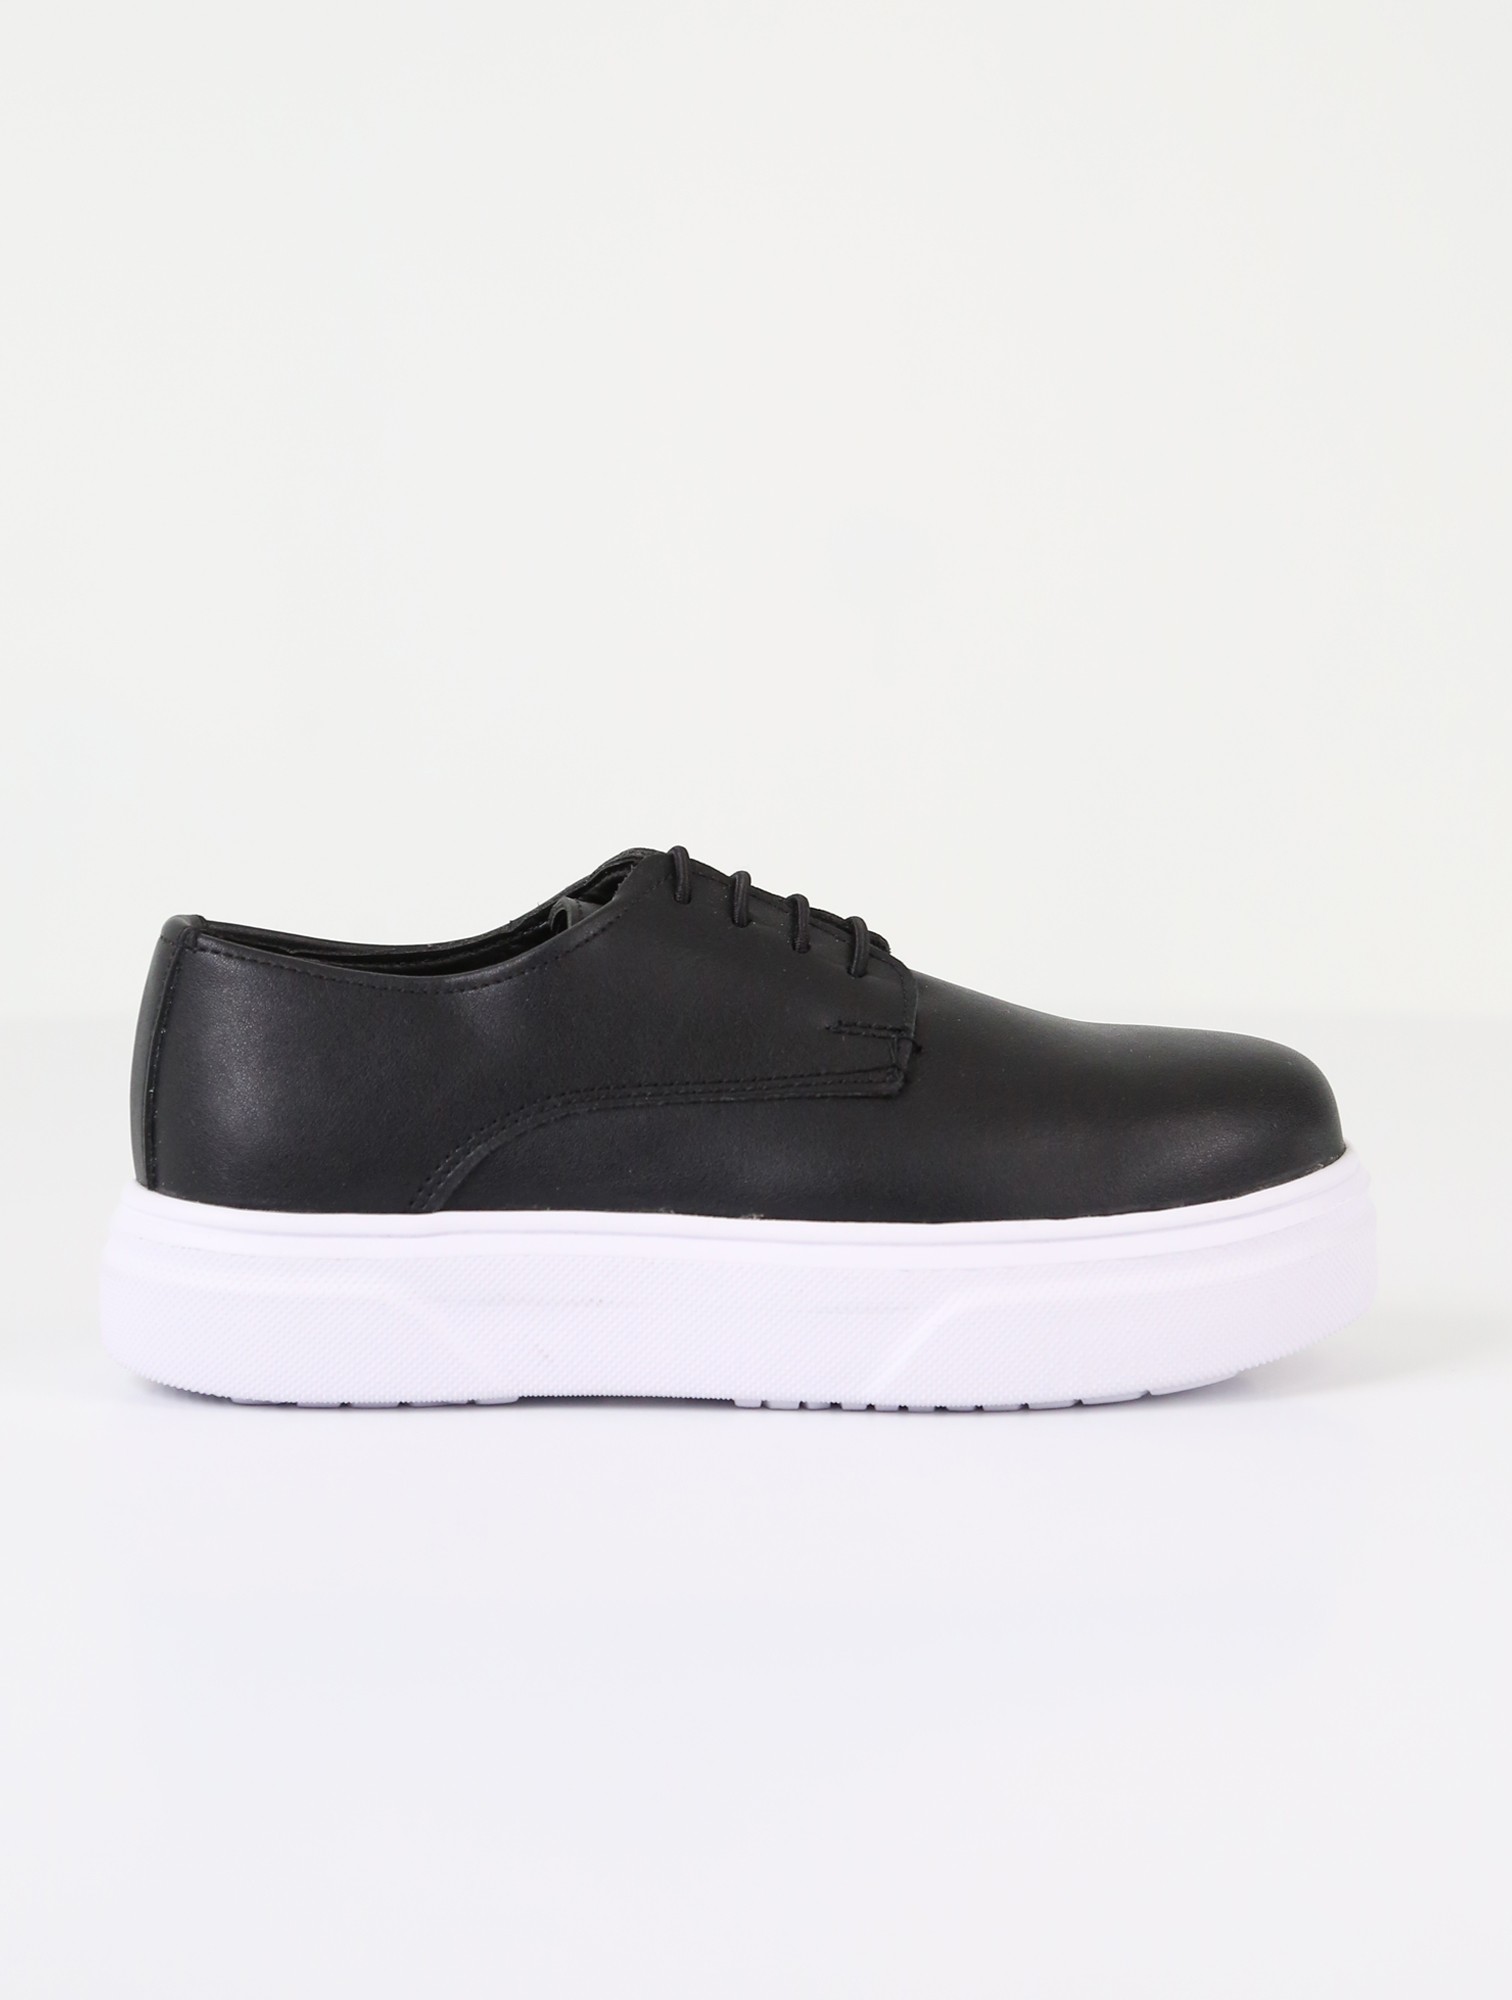 Boys Black Lace up Shoes for Formal & Casual Wear | SIRRI Kids Footwear